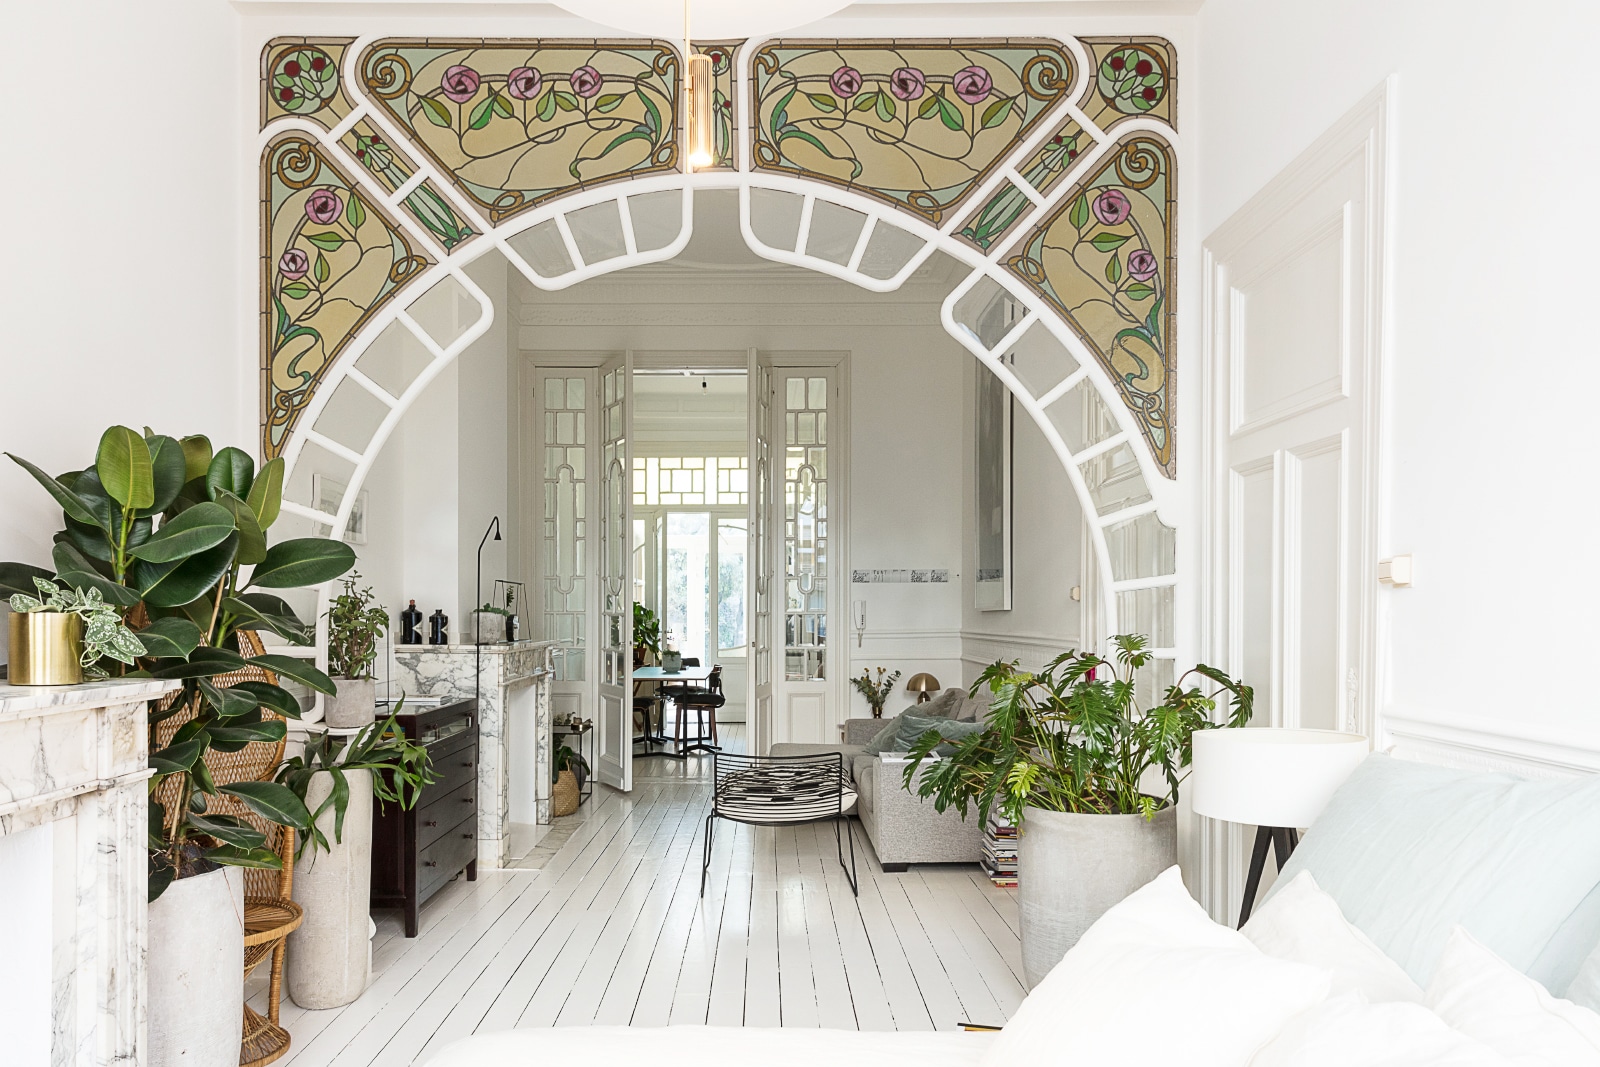 nouveau bohemian apartment in white with stunning stained glass window archways | house tour on coco kelley